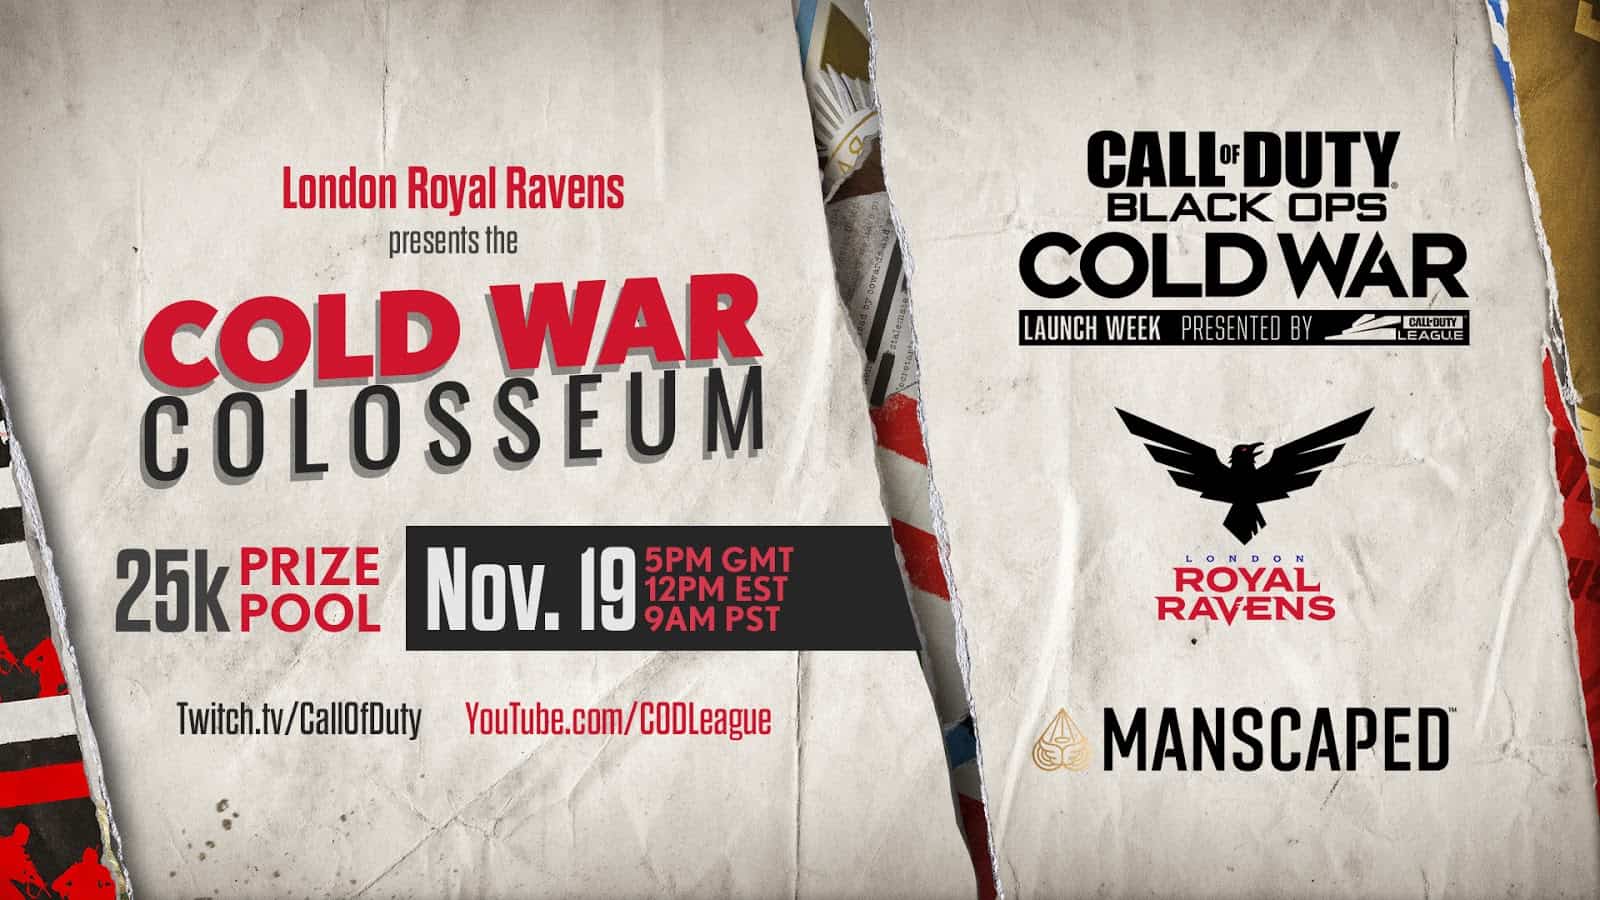 How to Watch $25K London Royal Ravens’ Cold War Colosseum